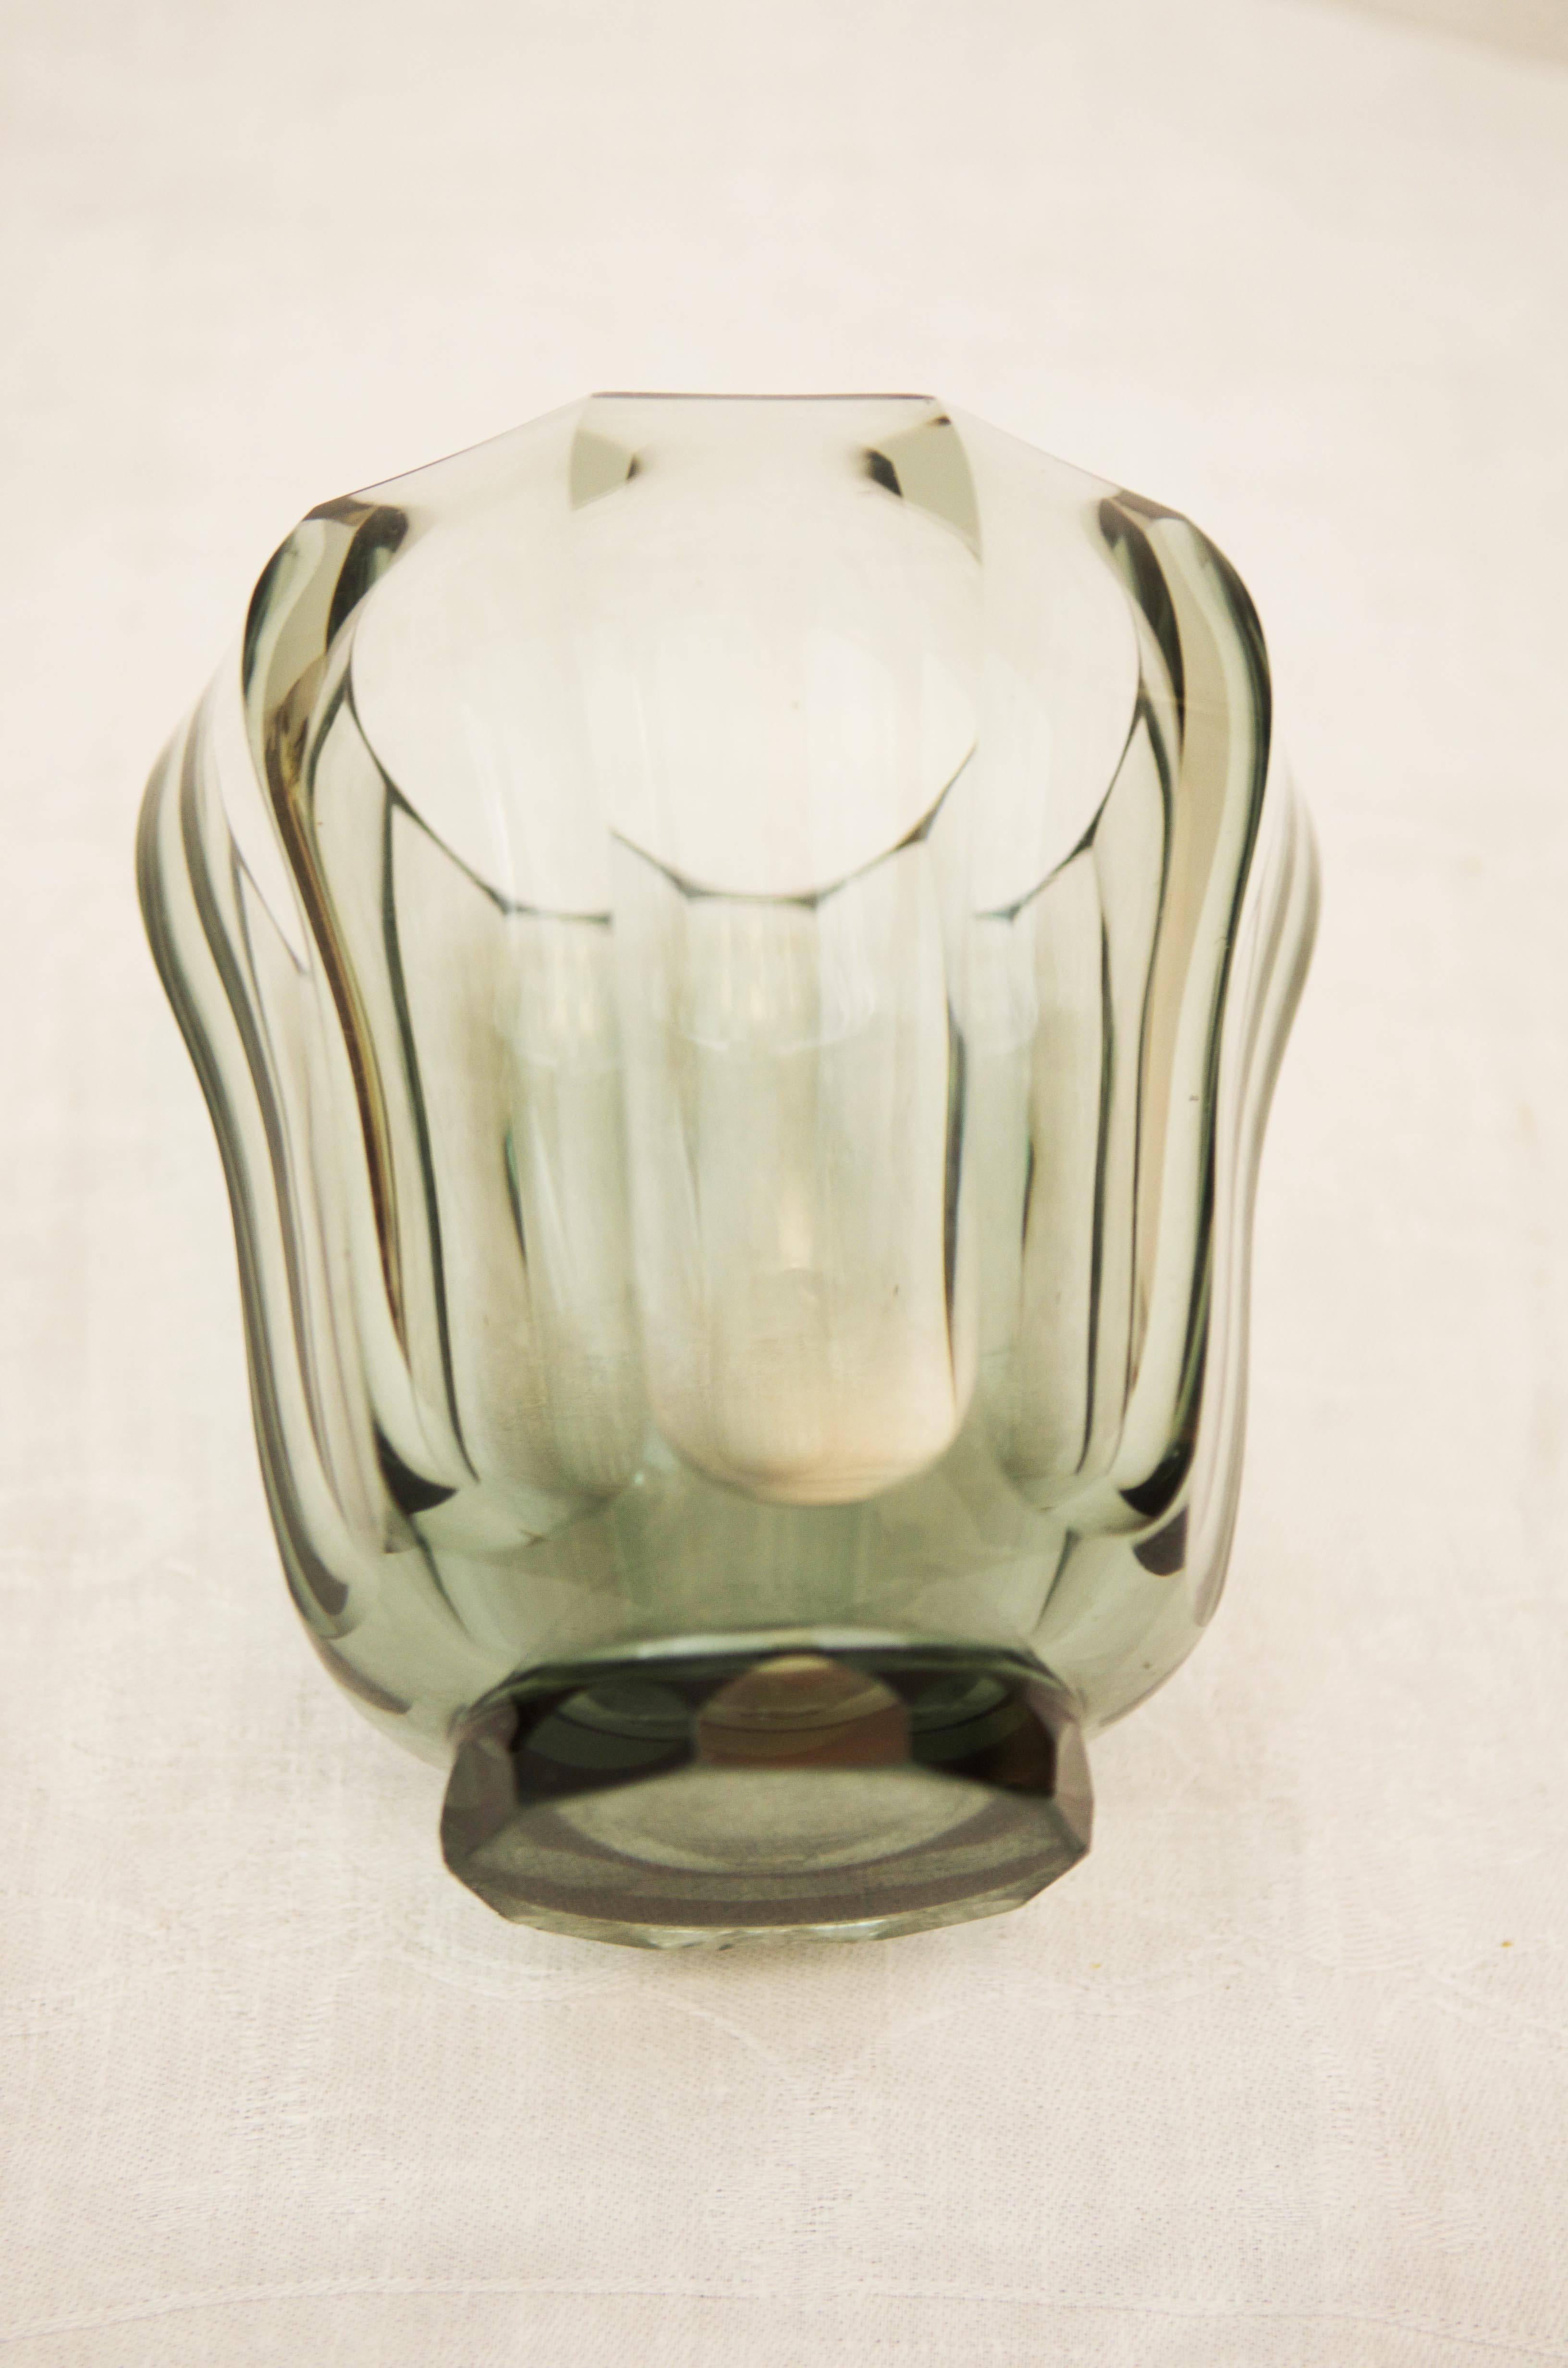 Art Deco bohemian crystal glass vase.
Beautiful condition but a small chip on the base